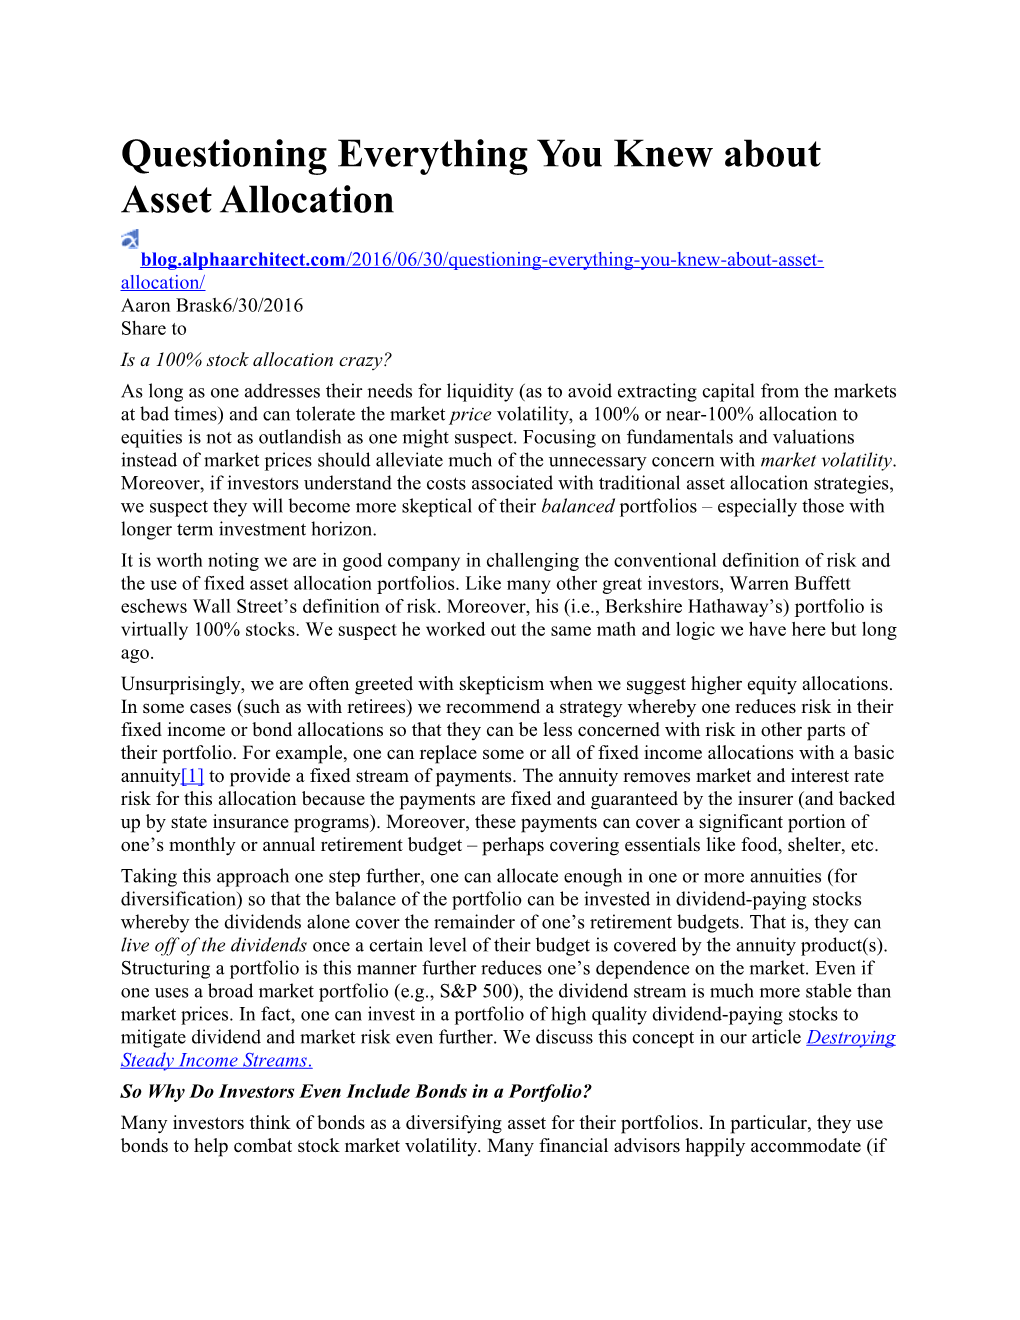 Questioning Everything You Knew About Asset Allocation